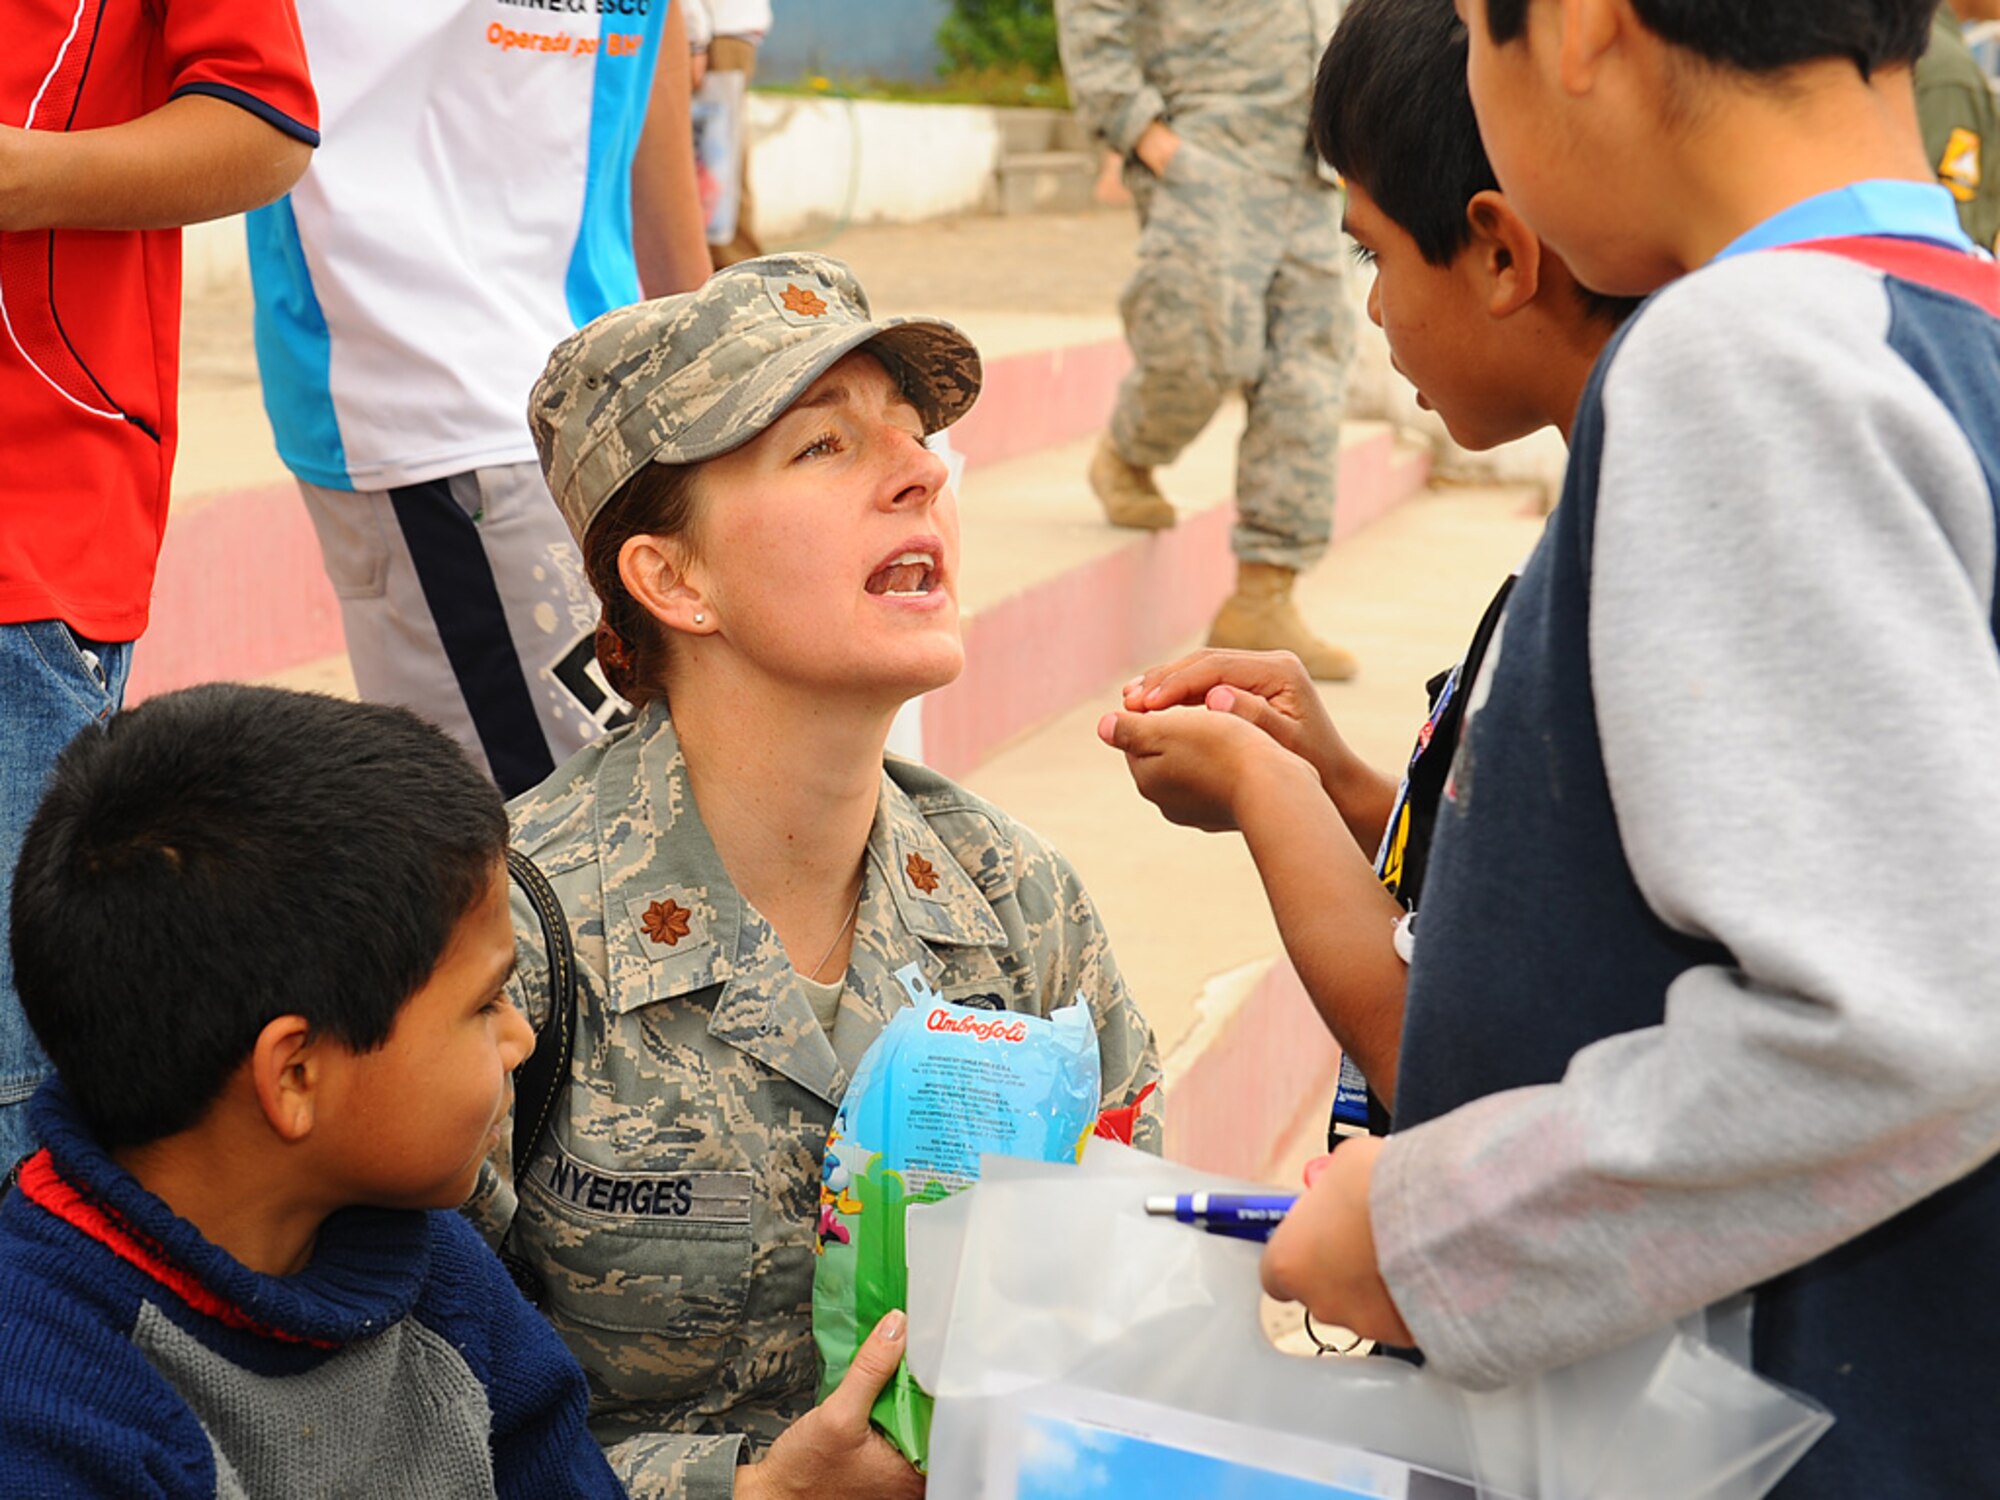 Maj. Jana Nyerges, a member of Air Forces Southern participating in exercise SALITRE, teaches English words to children at the Aldeas SOS orphanage during a visit to the center on Sunday.  More than 40 Airmen from the US Air Force, as well as, members of the Chilean and Argentine Air Forces, visited the home for orphaned and abandoned children in Antofagasta, Chile to donate items to the organization and provide an afternoon of fun and games to residents. (U.S. Air Force photo by Master Sgt. Daniel Farrell)